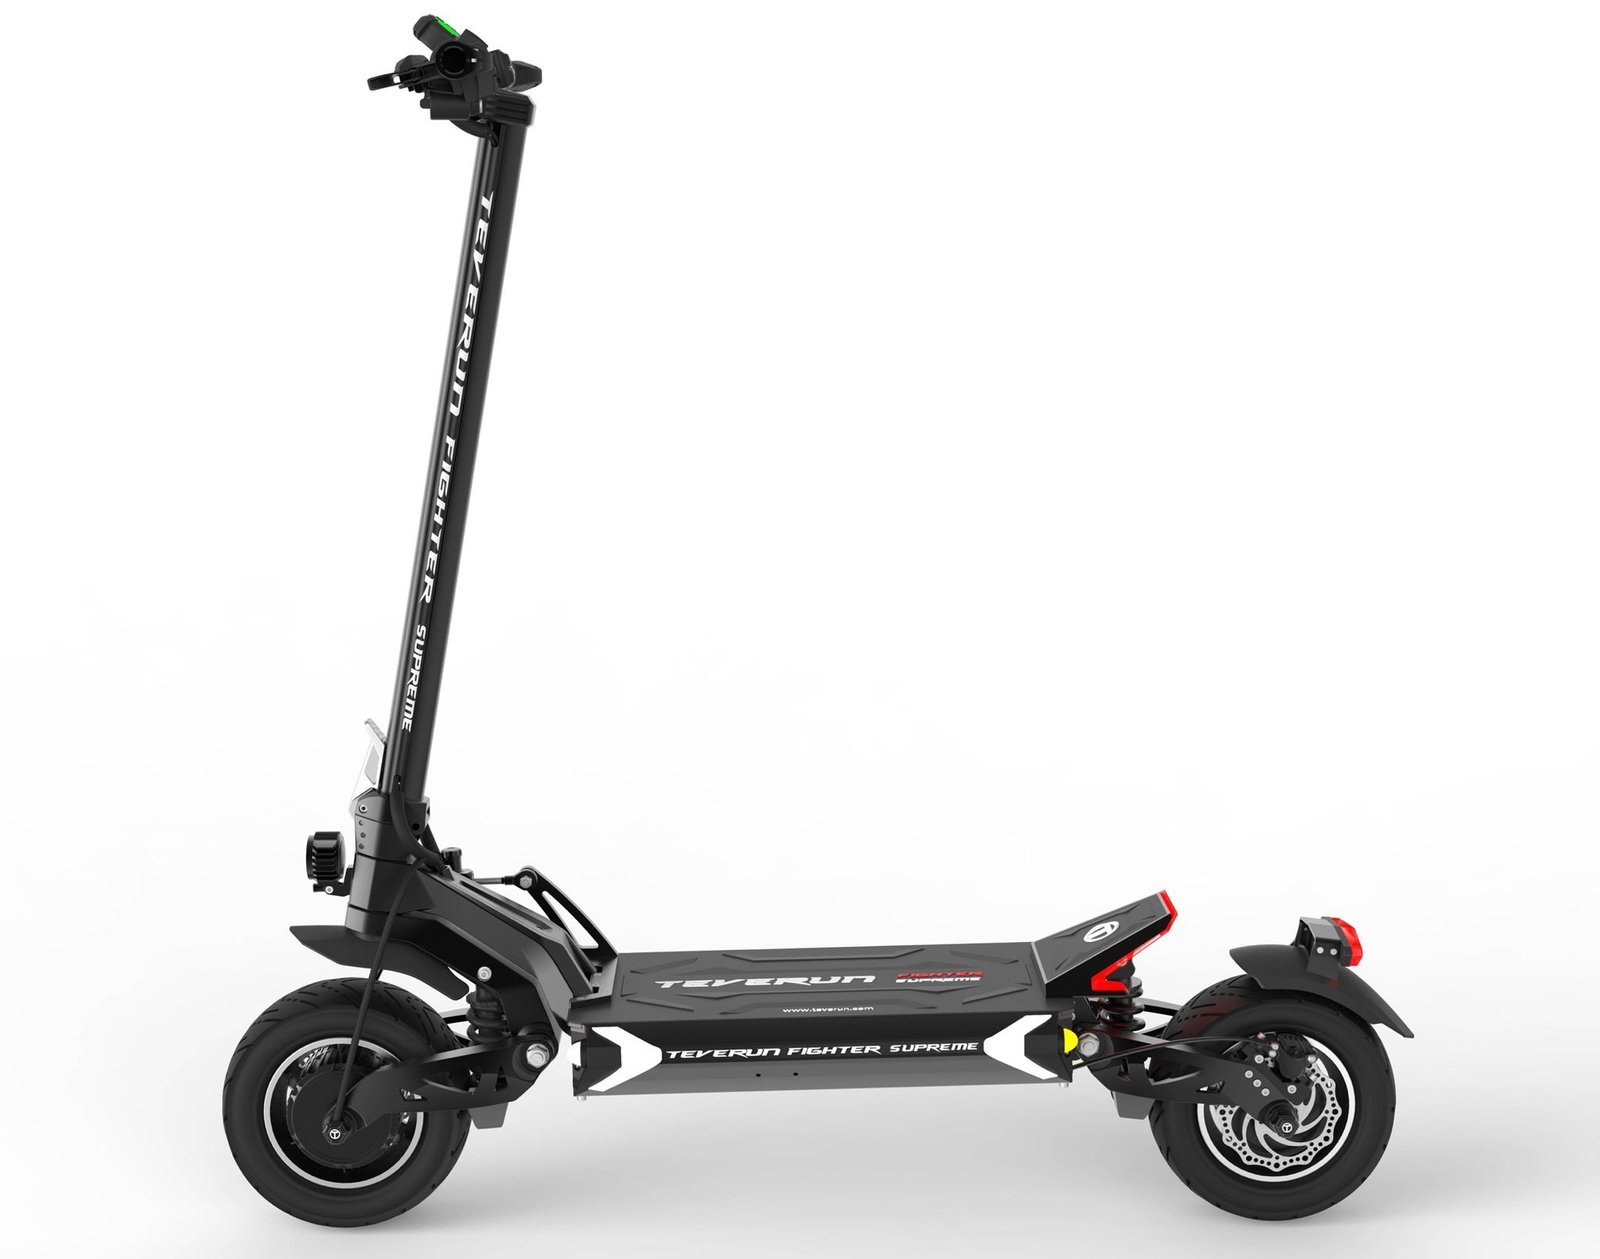 TEVERUN FIGHTER SUPREME Electric Scooter